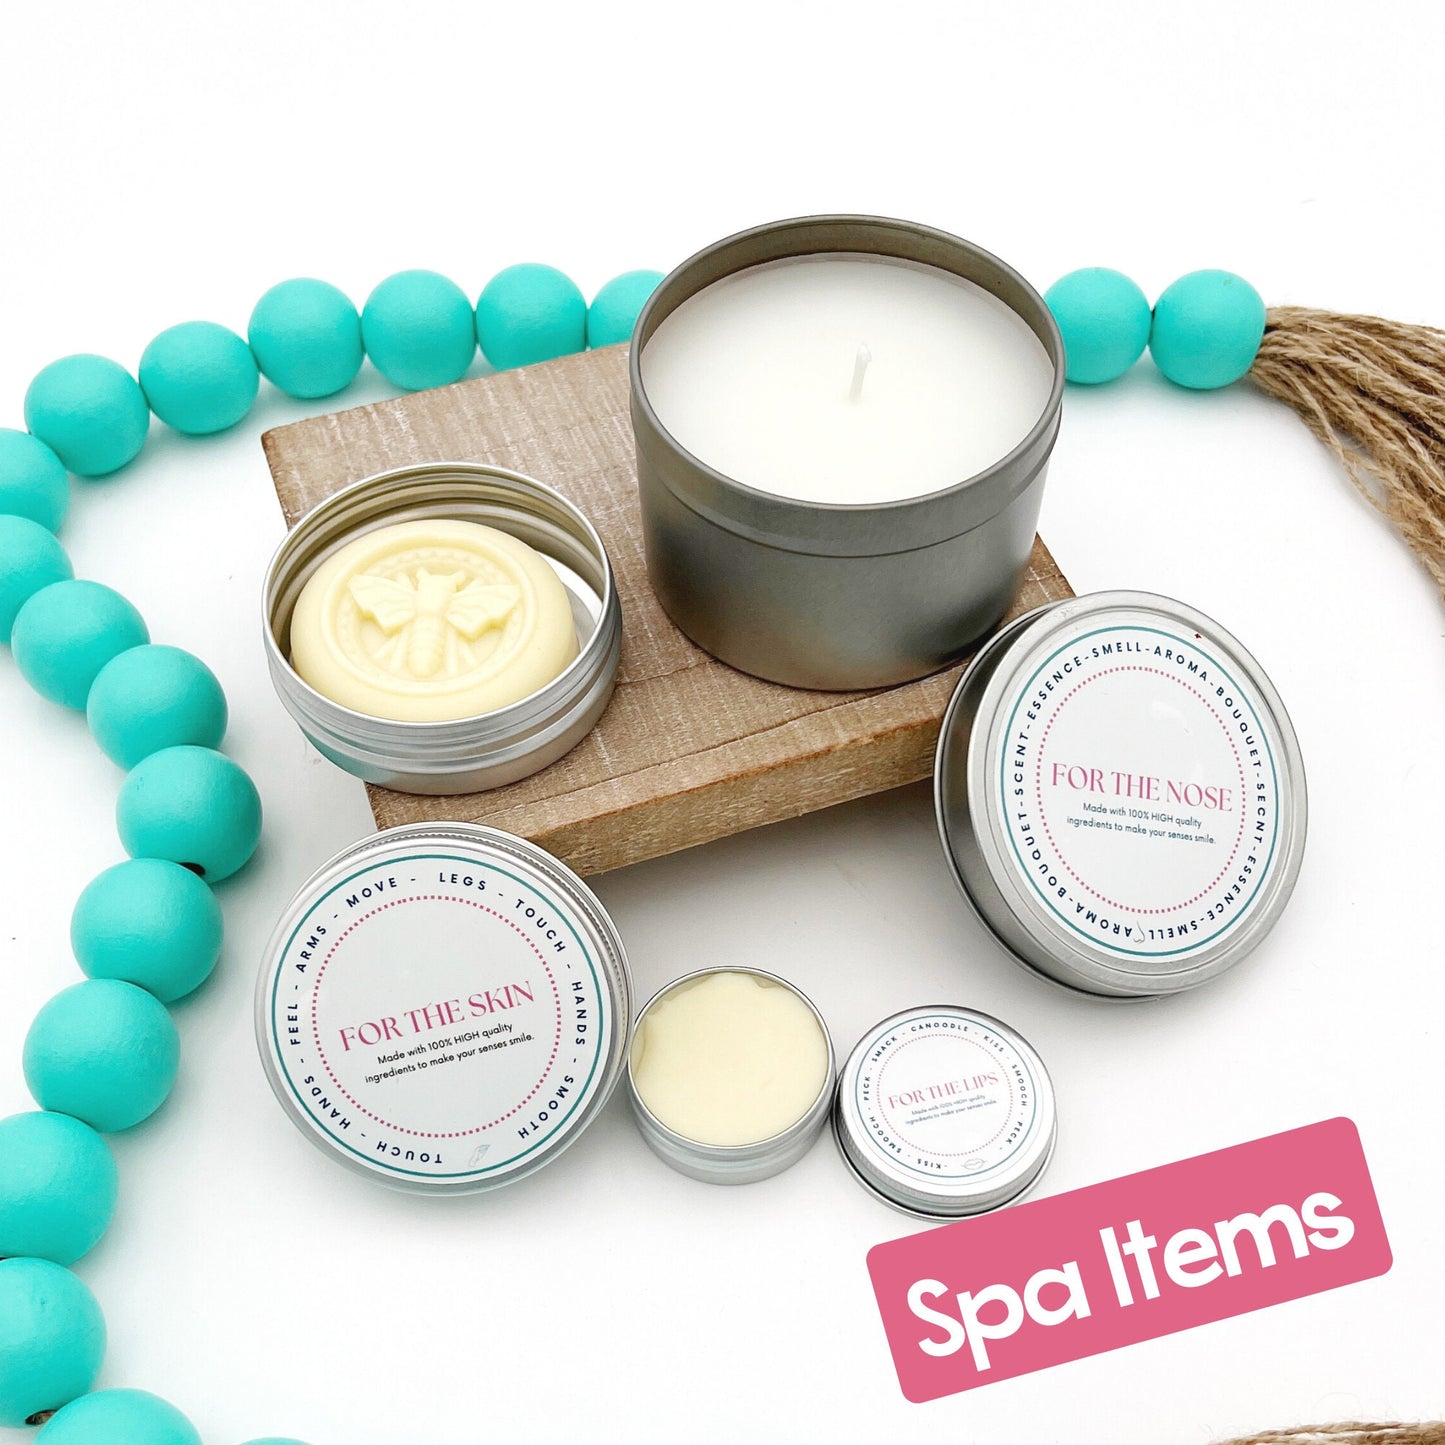 lip balm, candle, and lotion bar on a wooden riser.